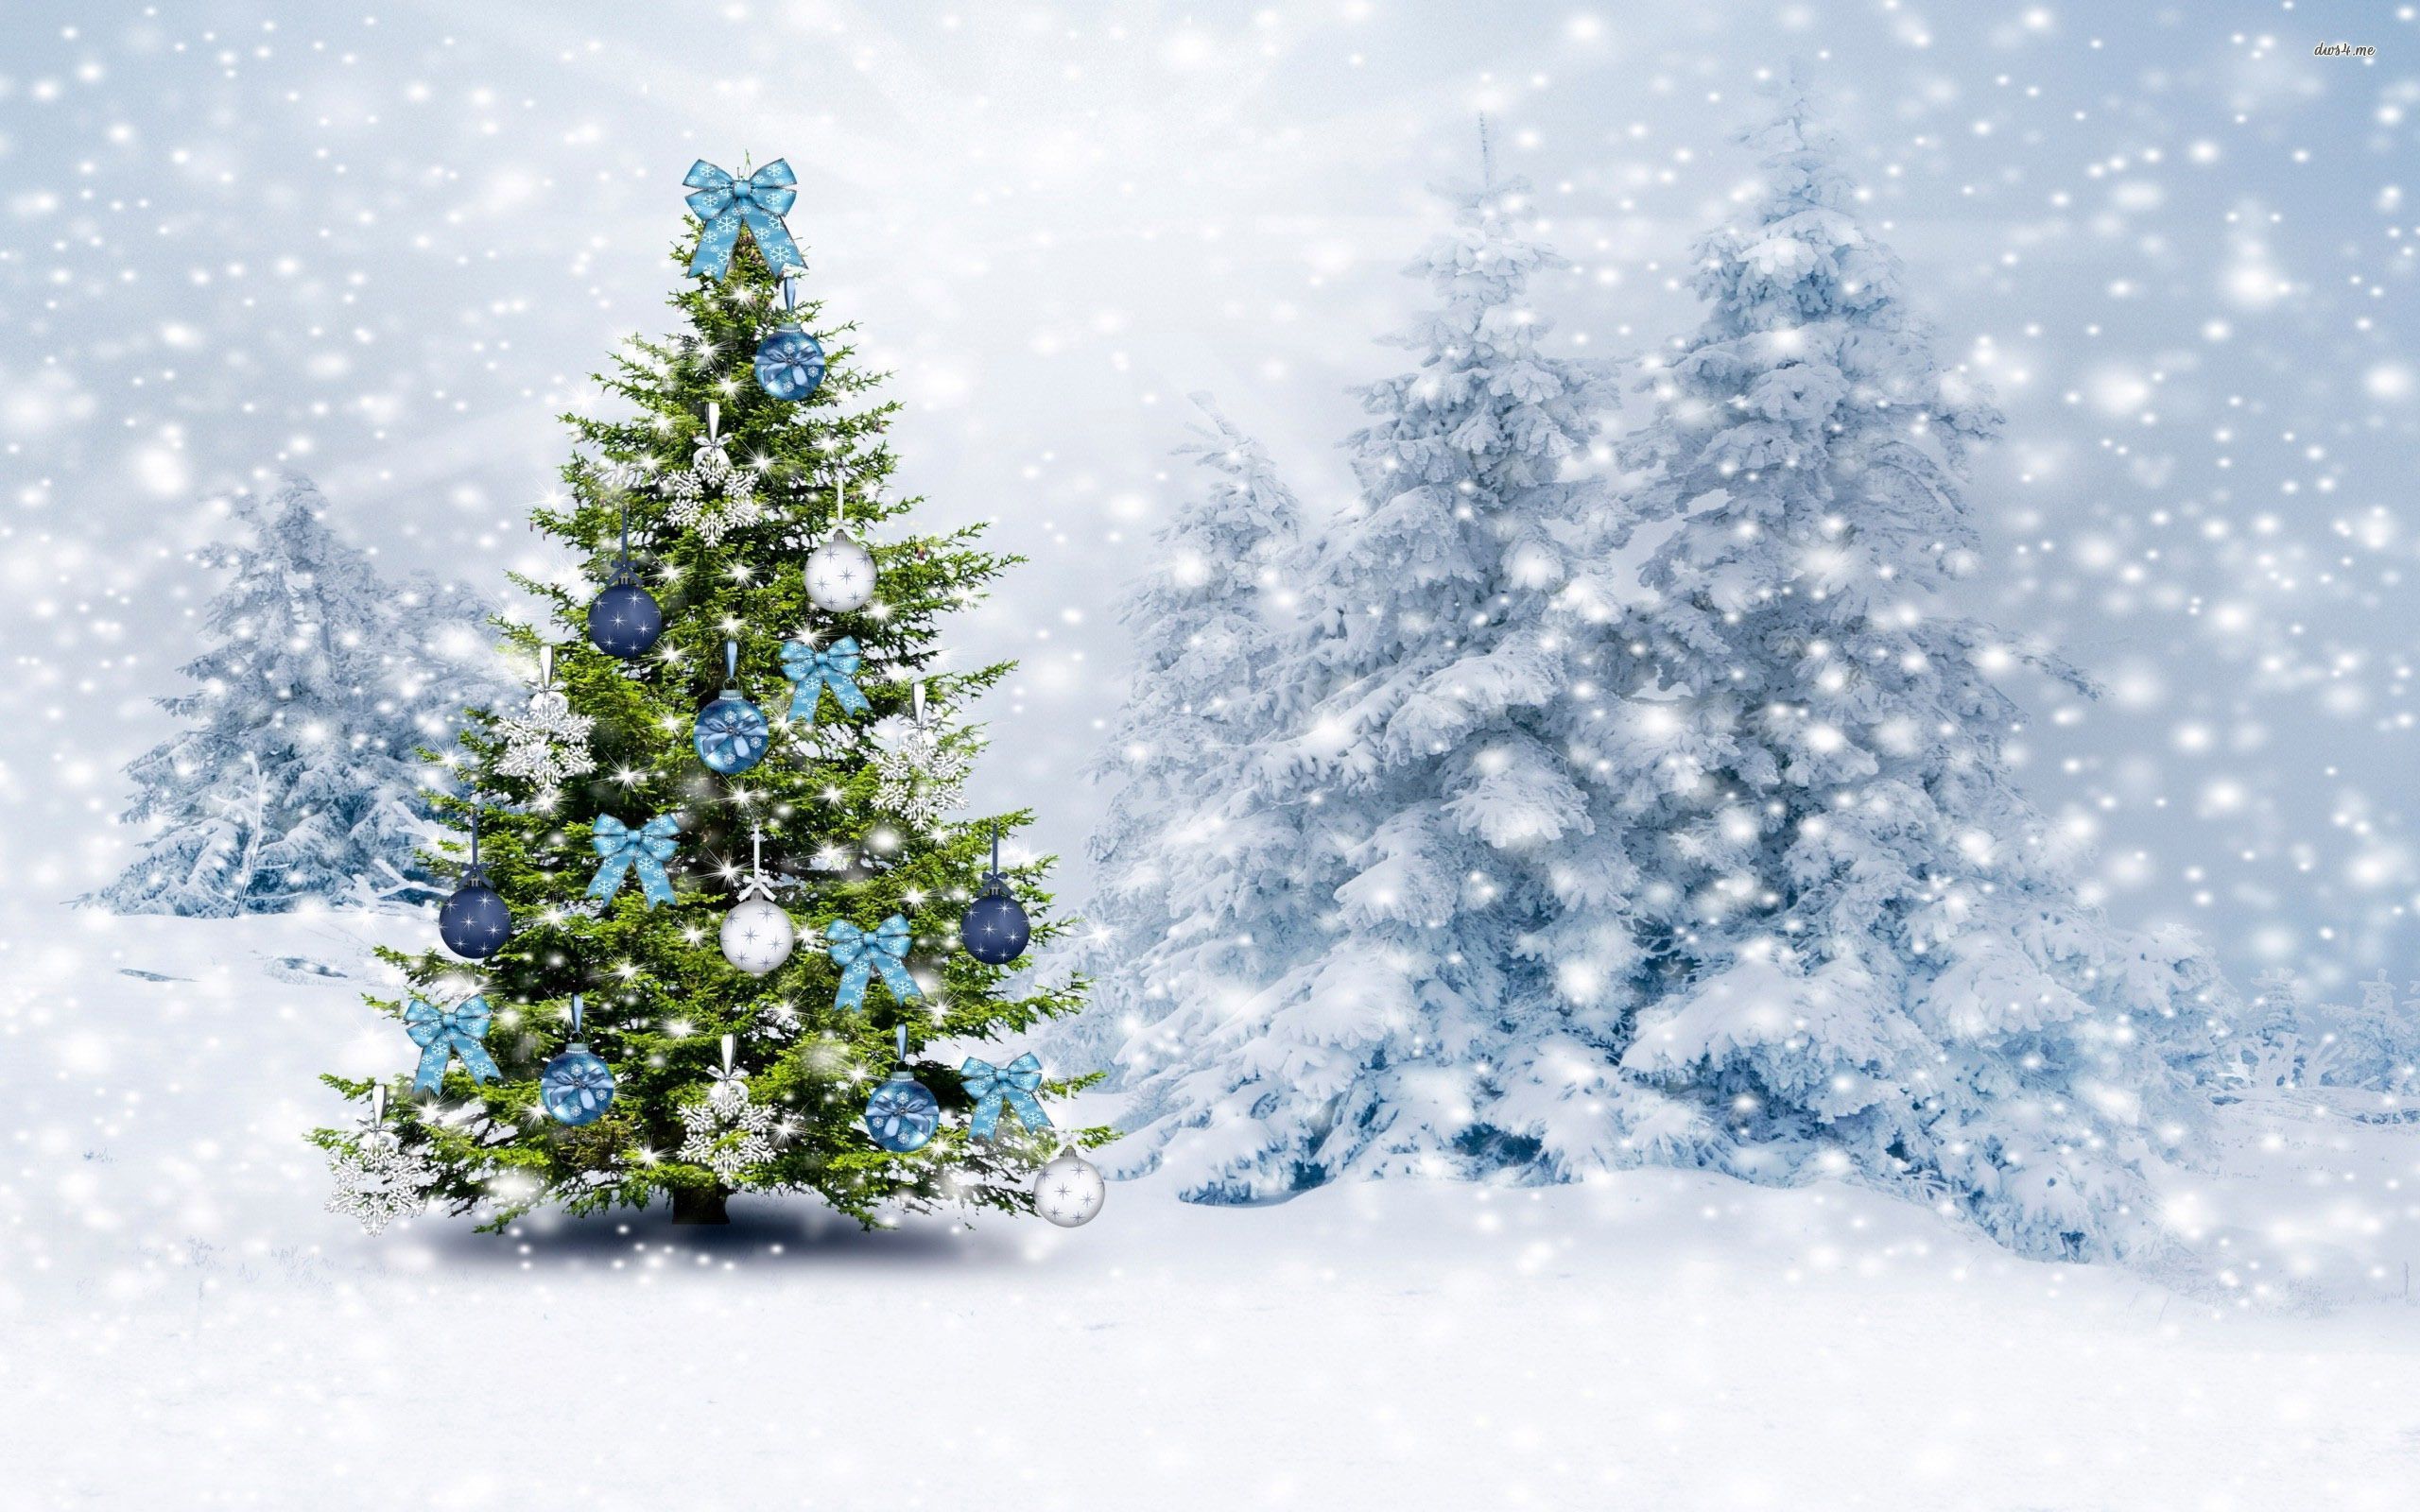 Christmas tree in the snowy forest HD wallpaper. Christmas tree wallpaper, Christmas tree background, Christmas wallpaper